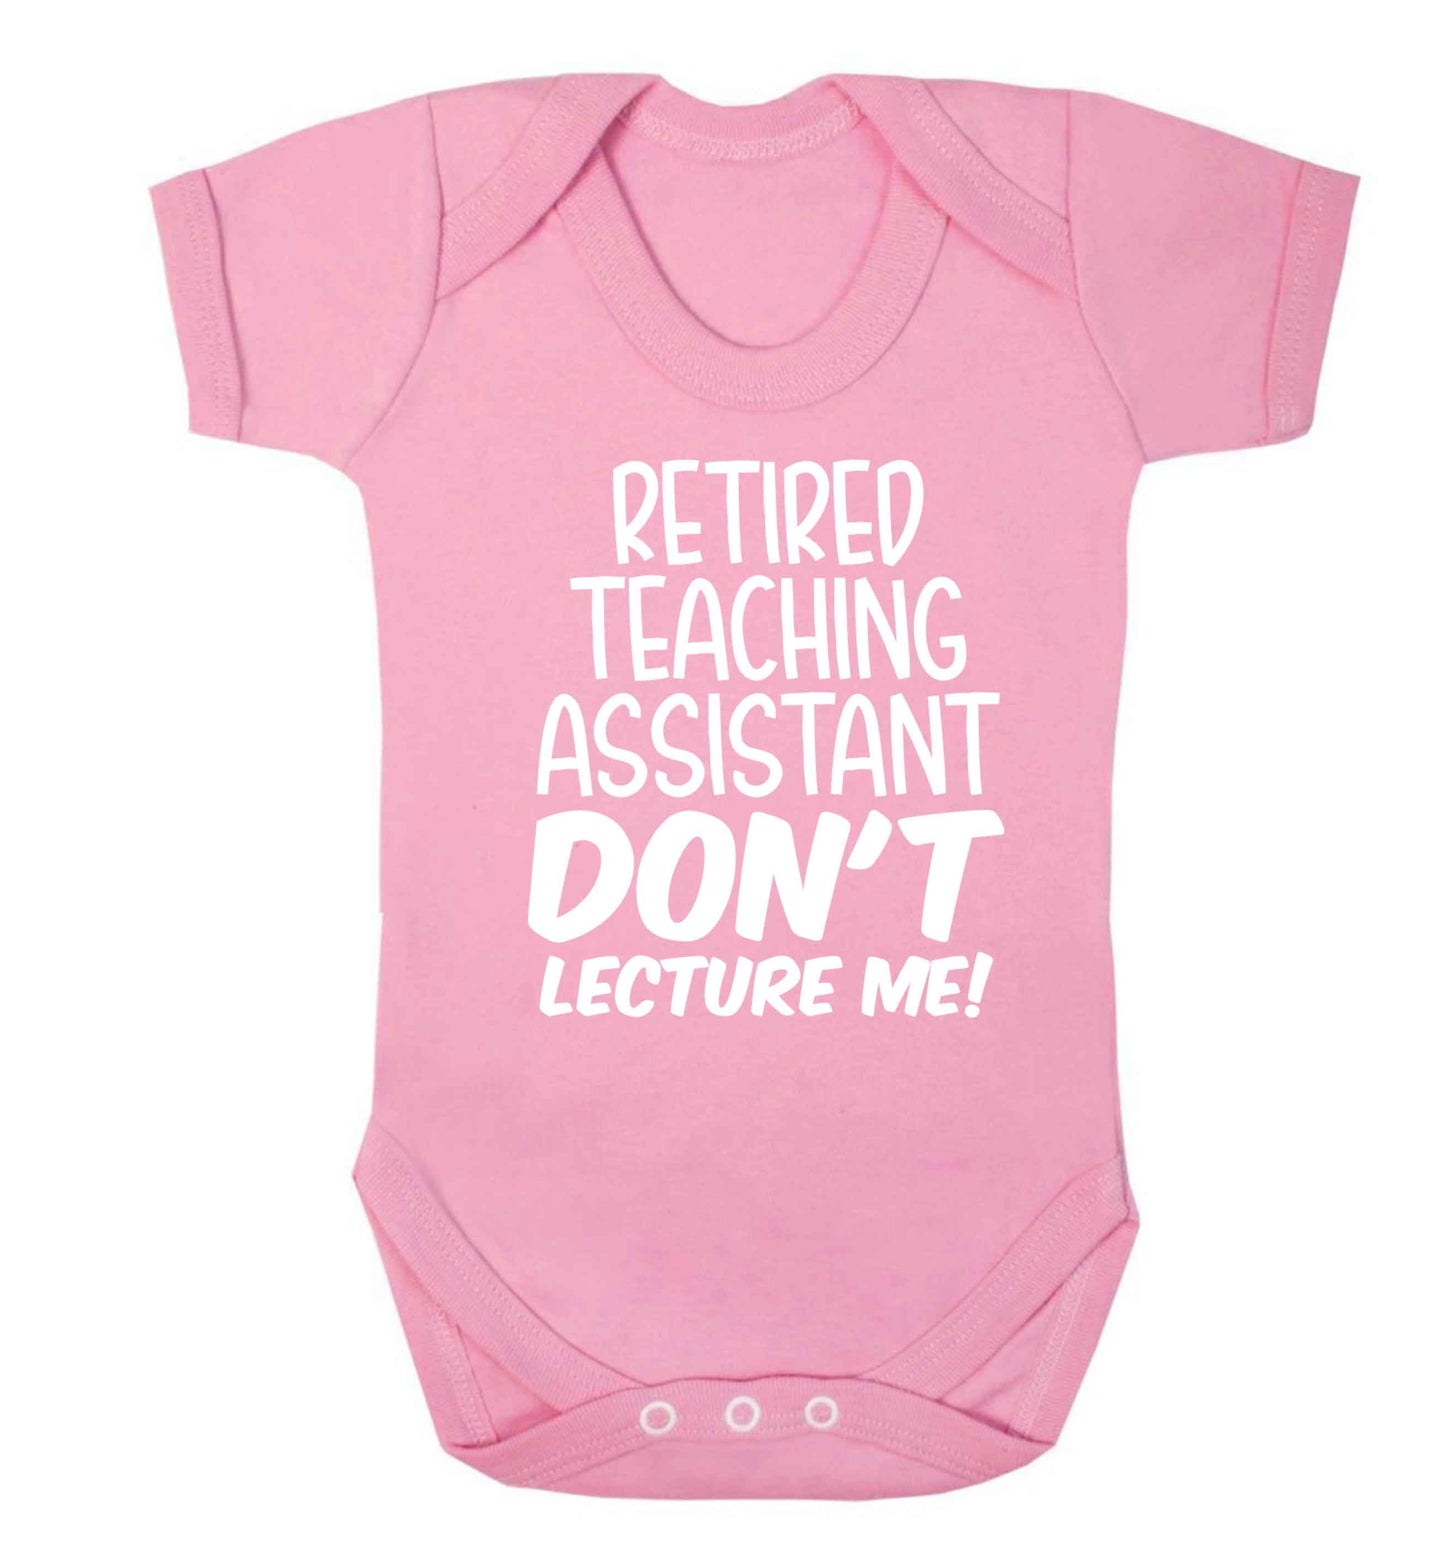 Retired teaching assistant don't lecture me Baby Vest pale pink 18-24 months